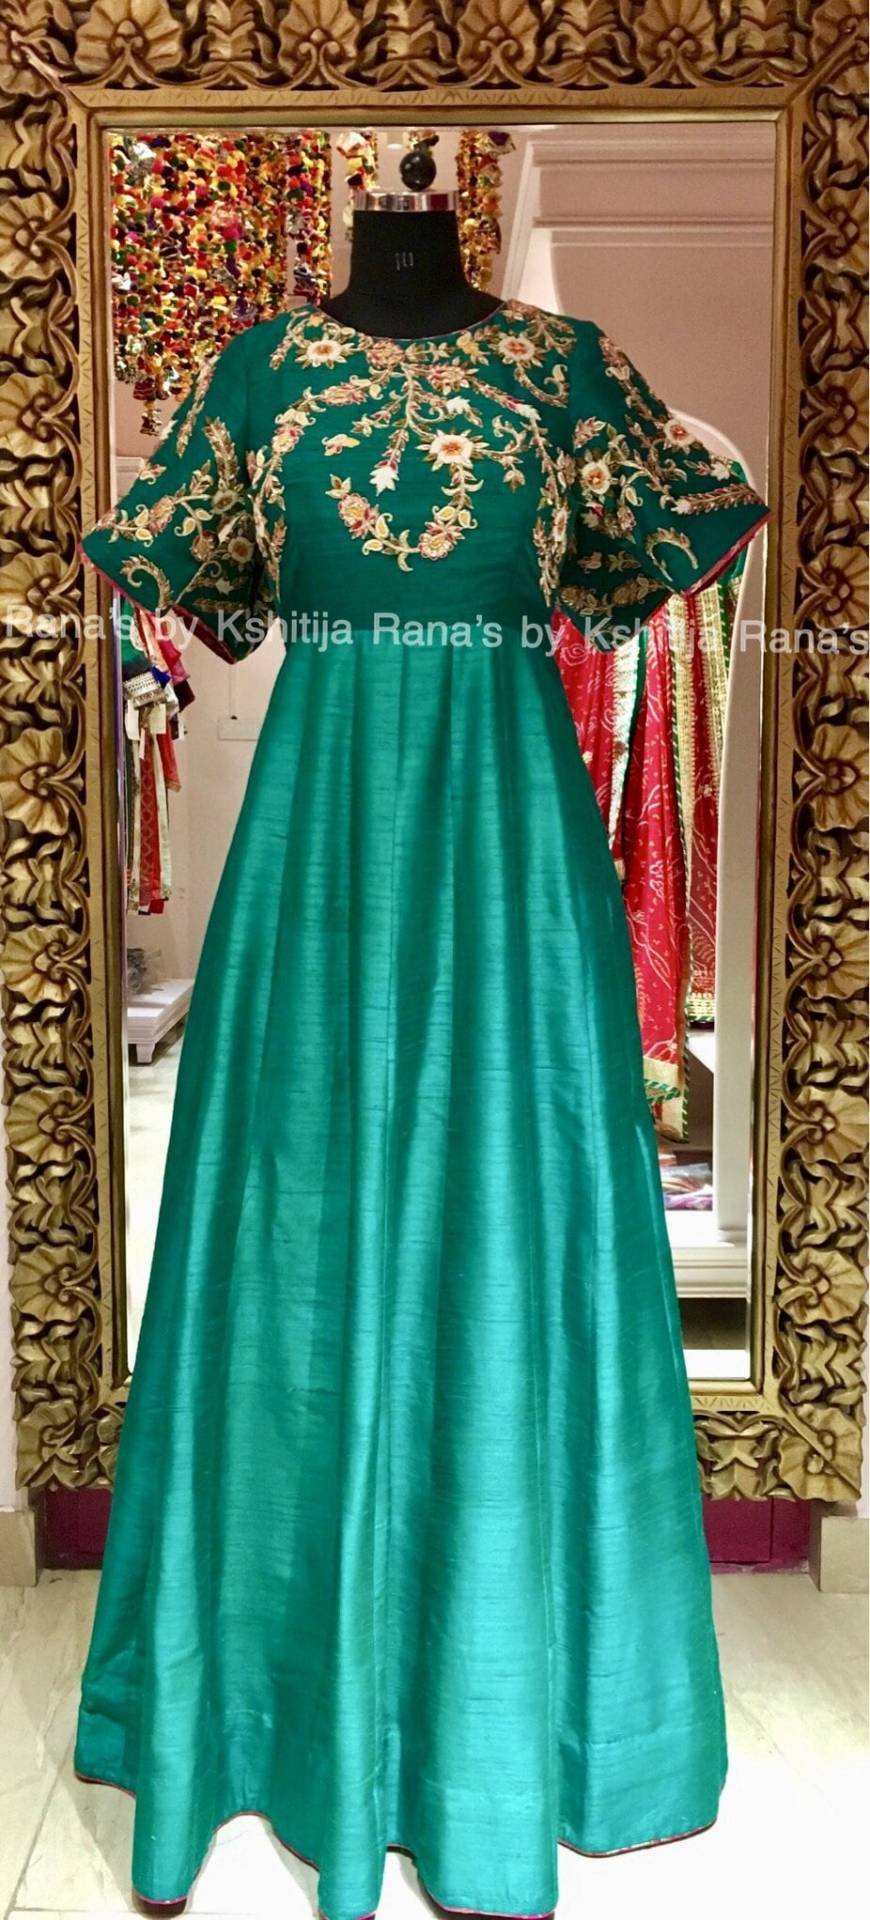 Regal floral length dress in emerald green gown